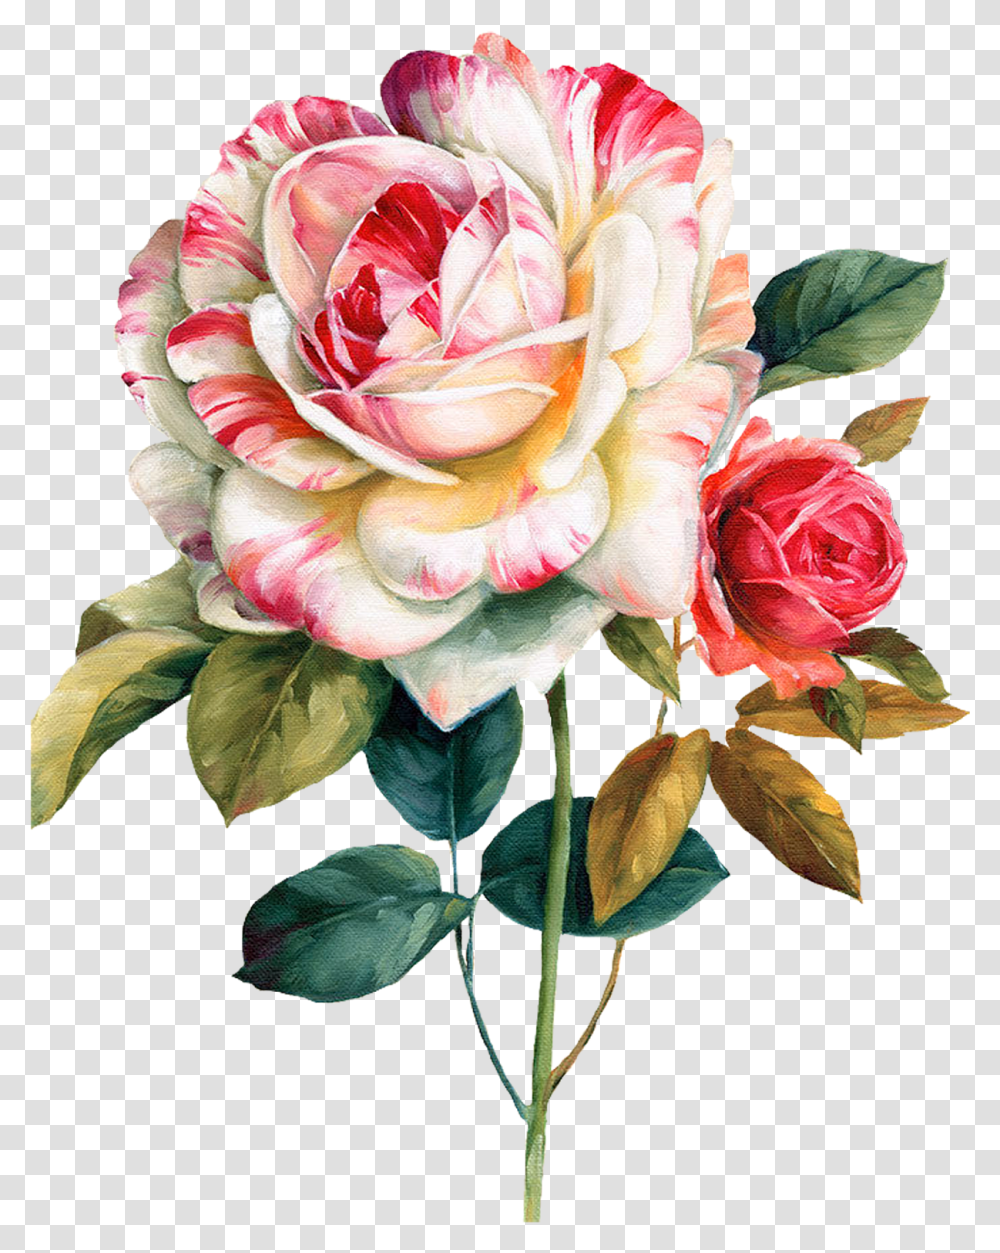 Pink And Red Roses Flower Watercolor Painting Floral, Plant, Blossom, Petal, Flower Arrangement Transparent Png